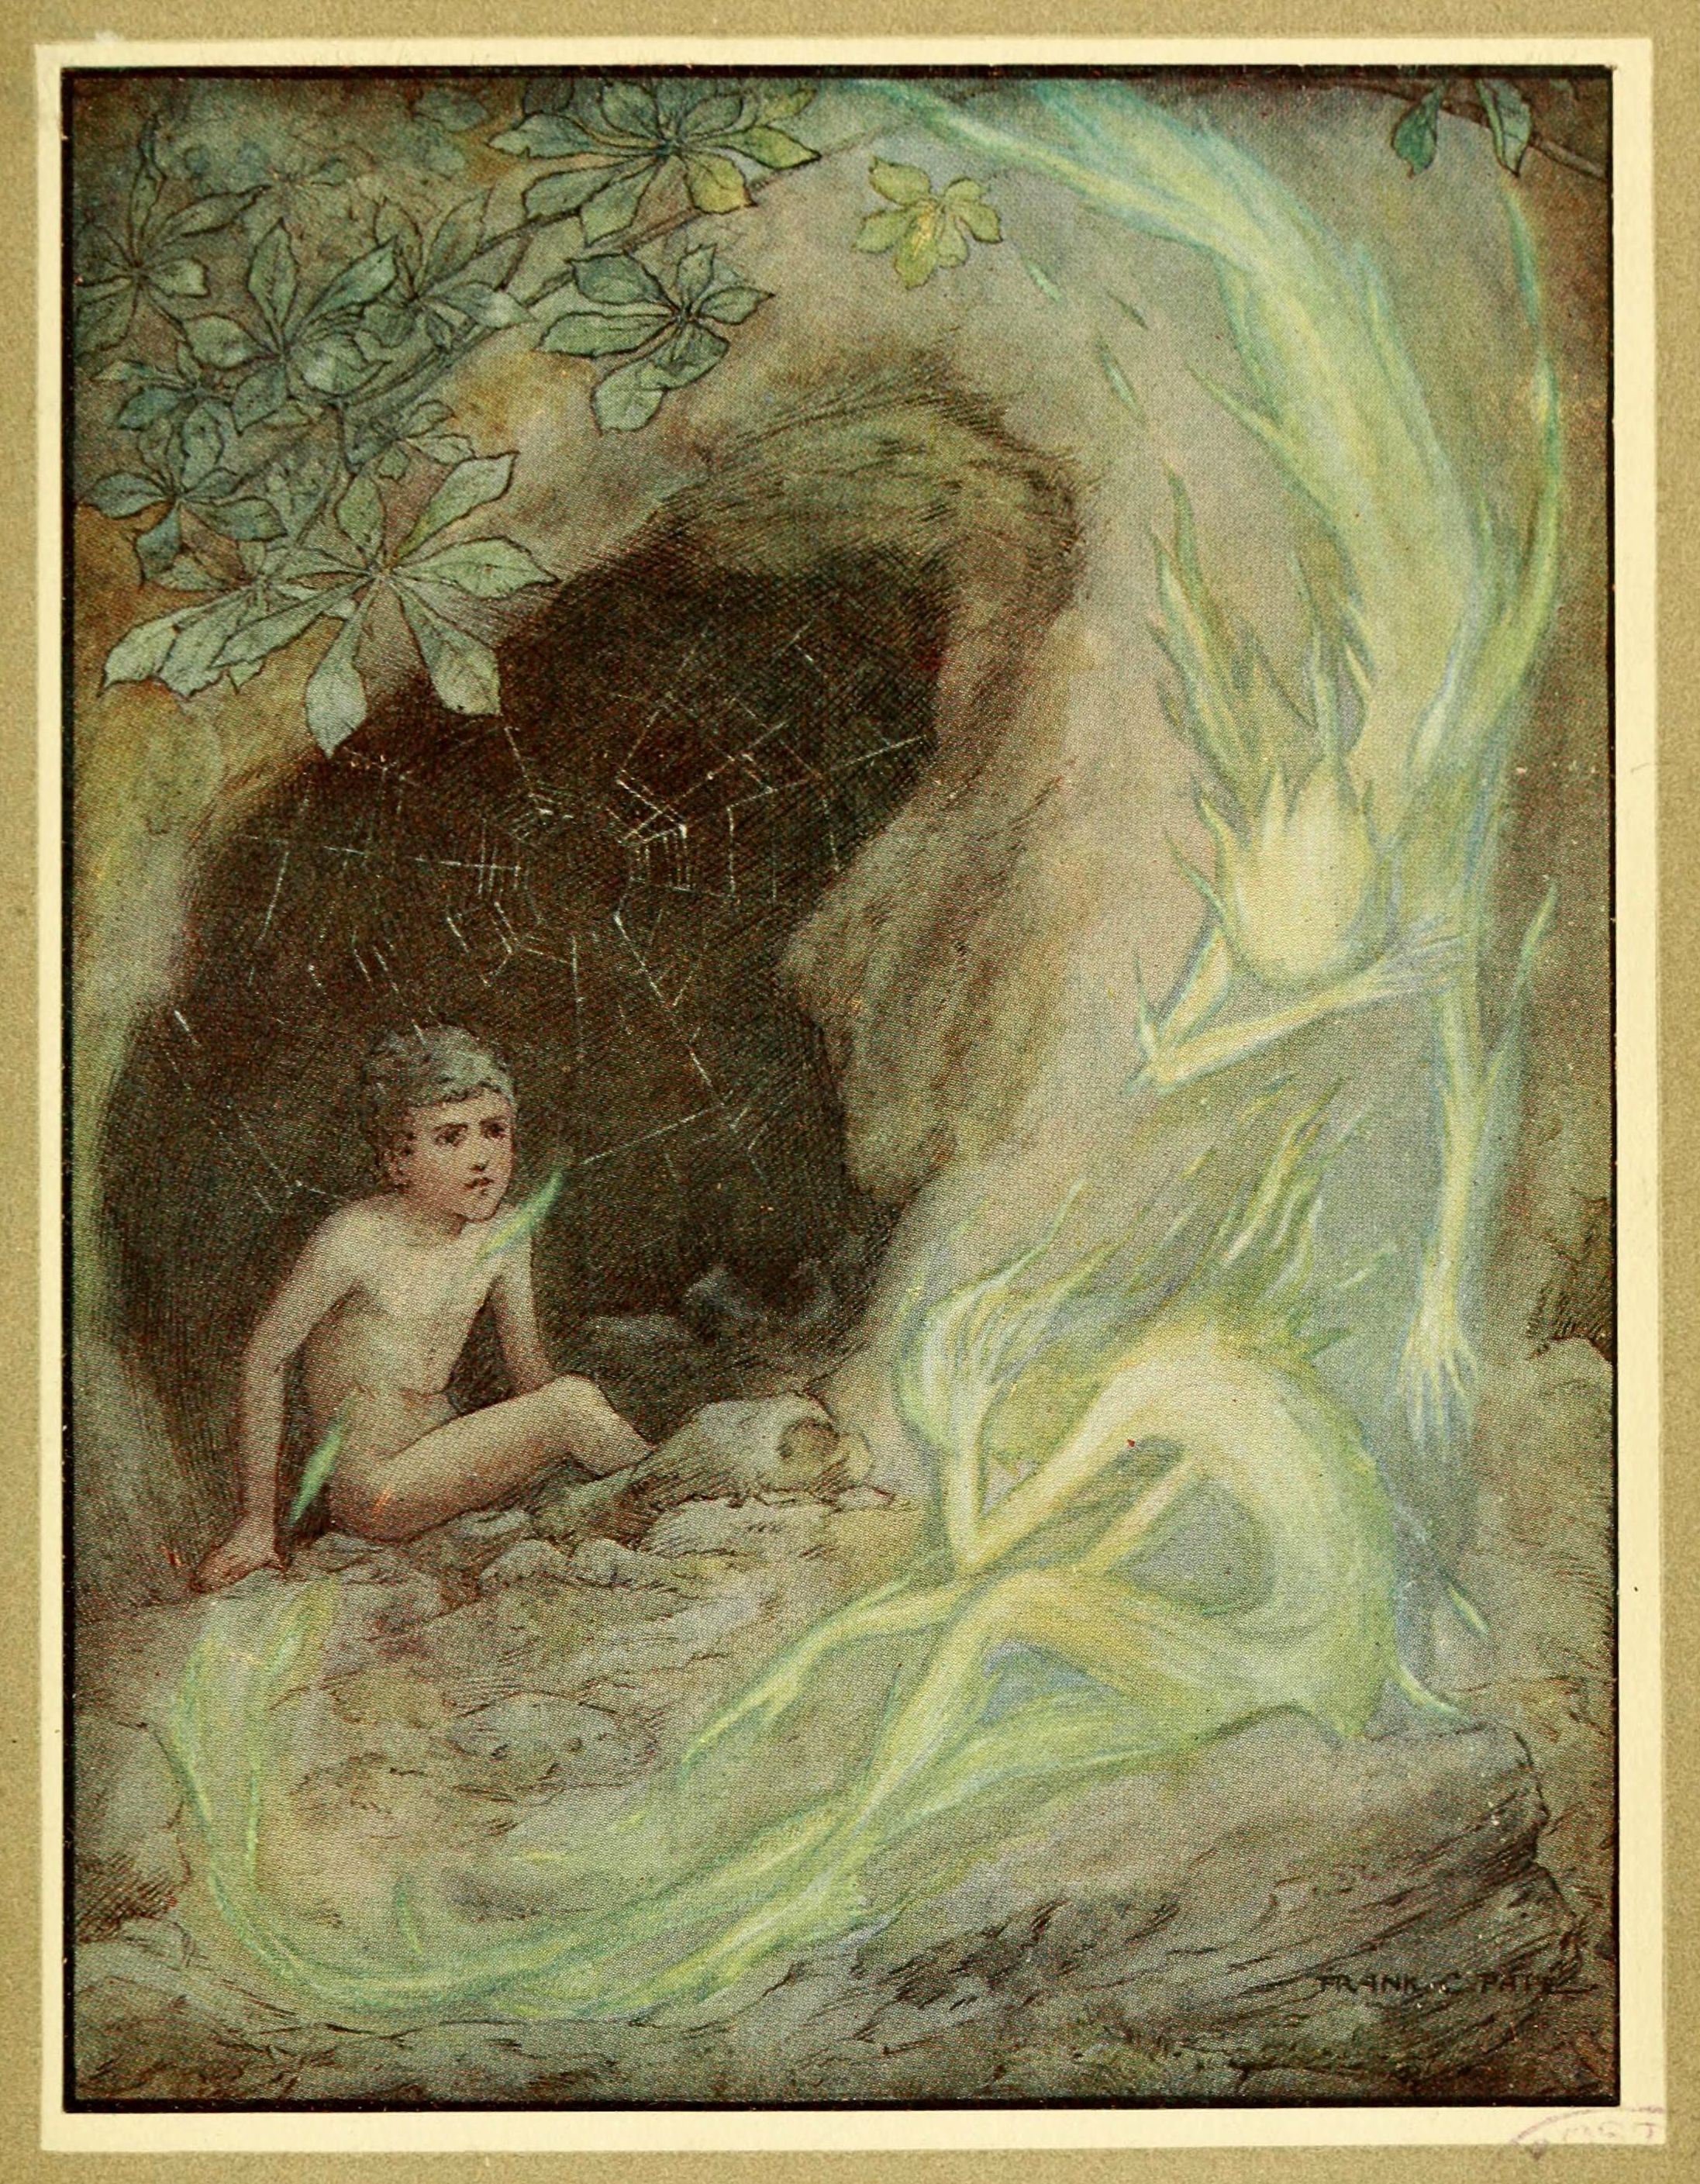 An image of a child encountering the Will O' The Wisp.